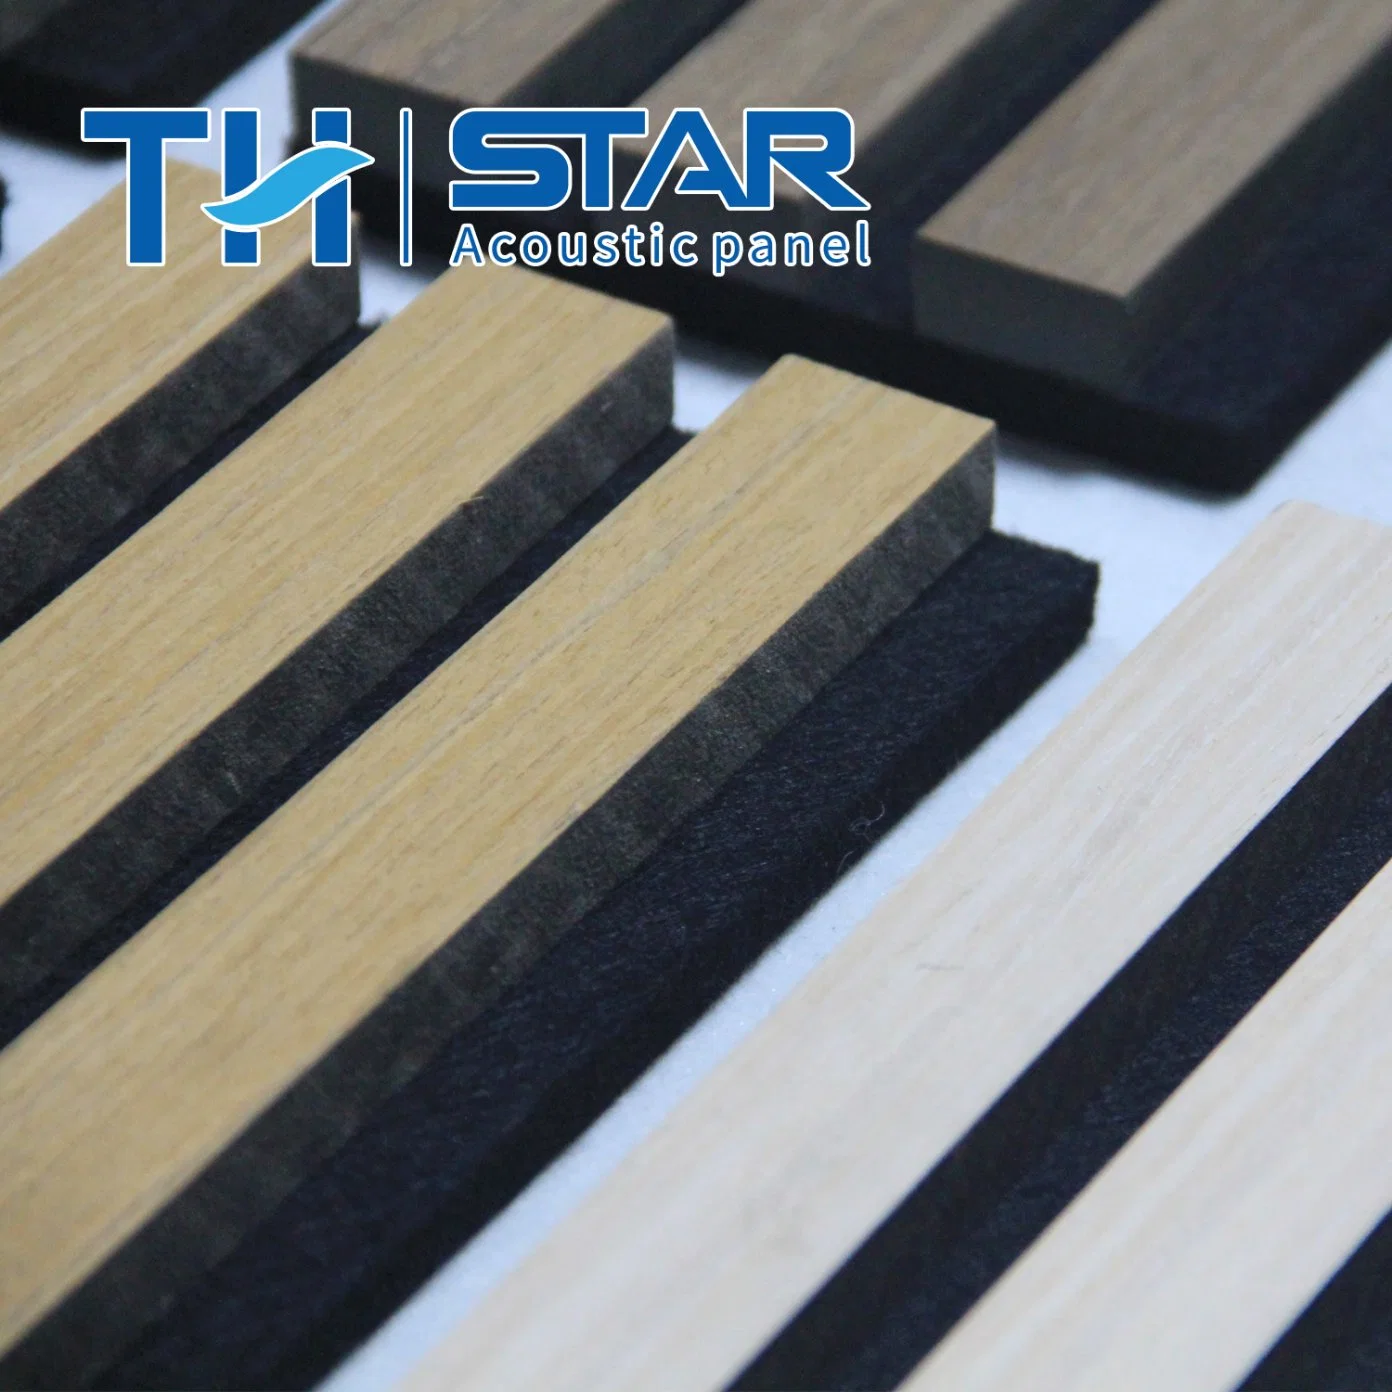 Th-Star Acoustic Ceiling Fire Resistant Panel 100% Recycled